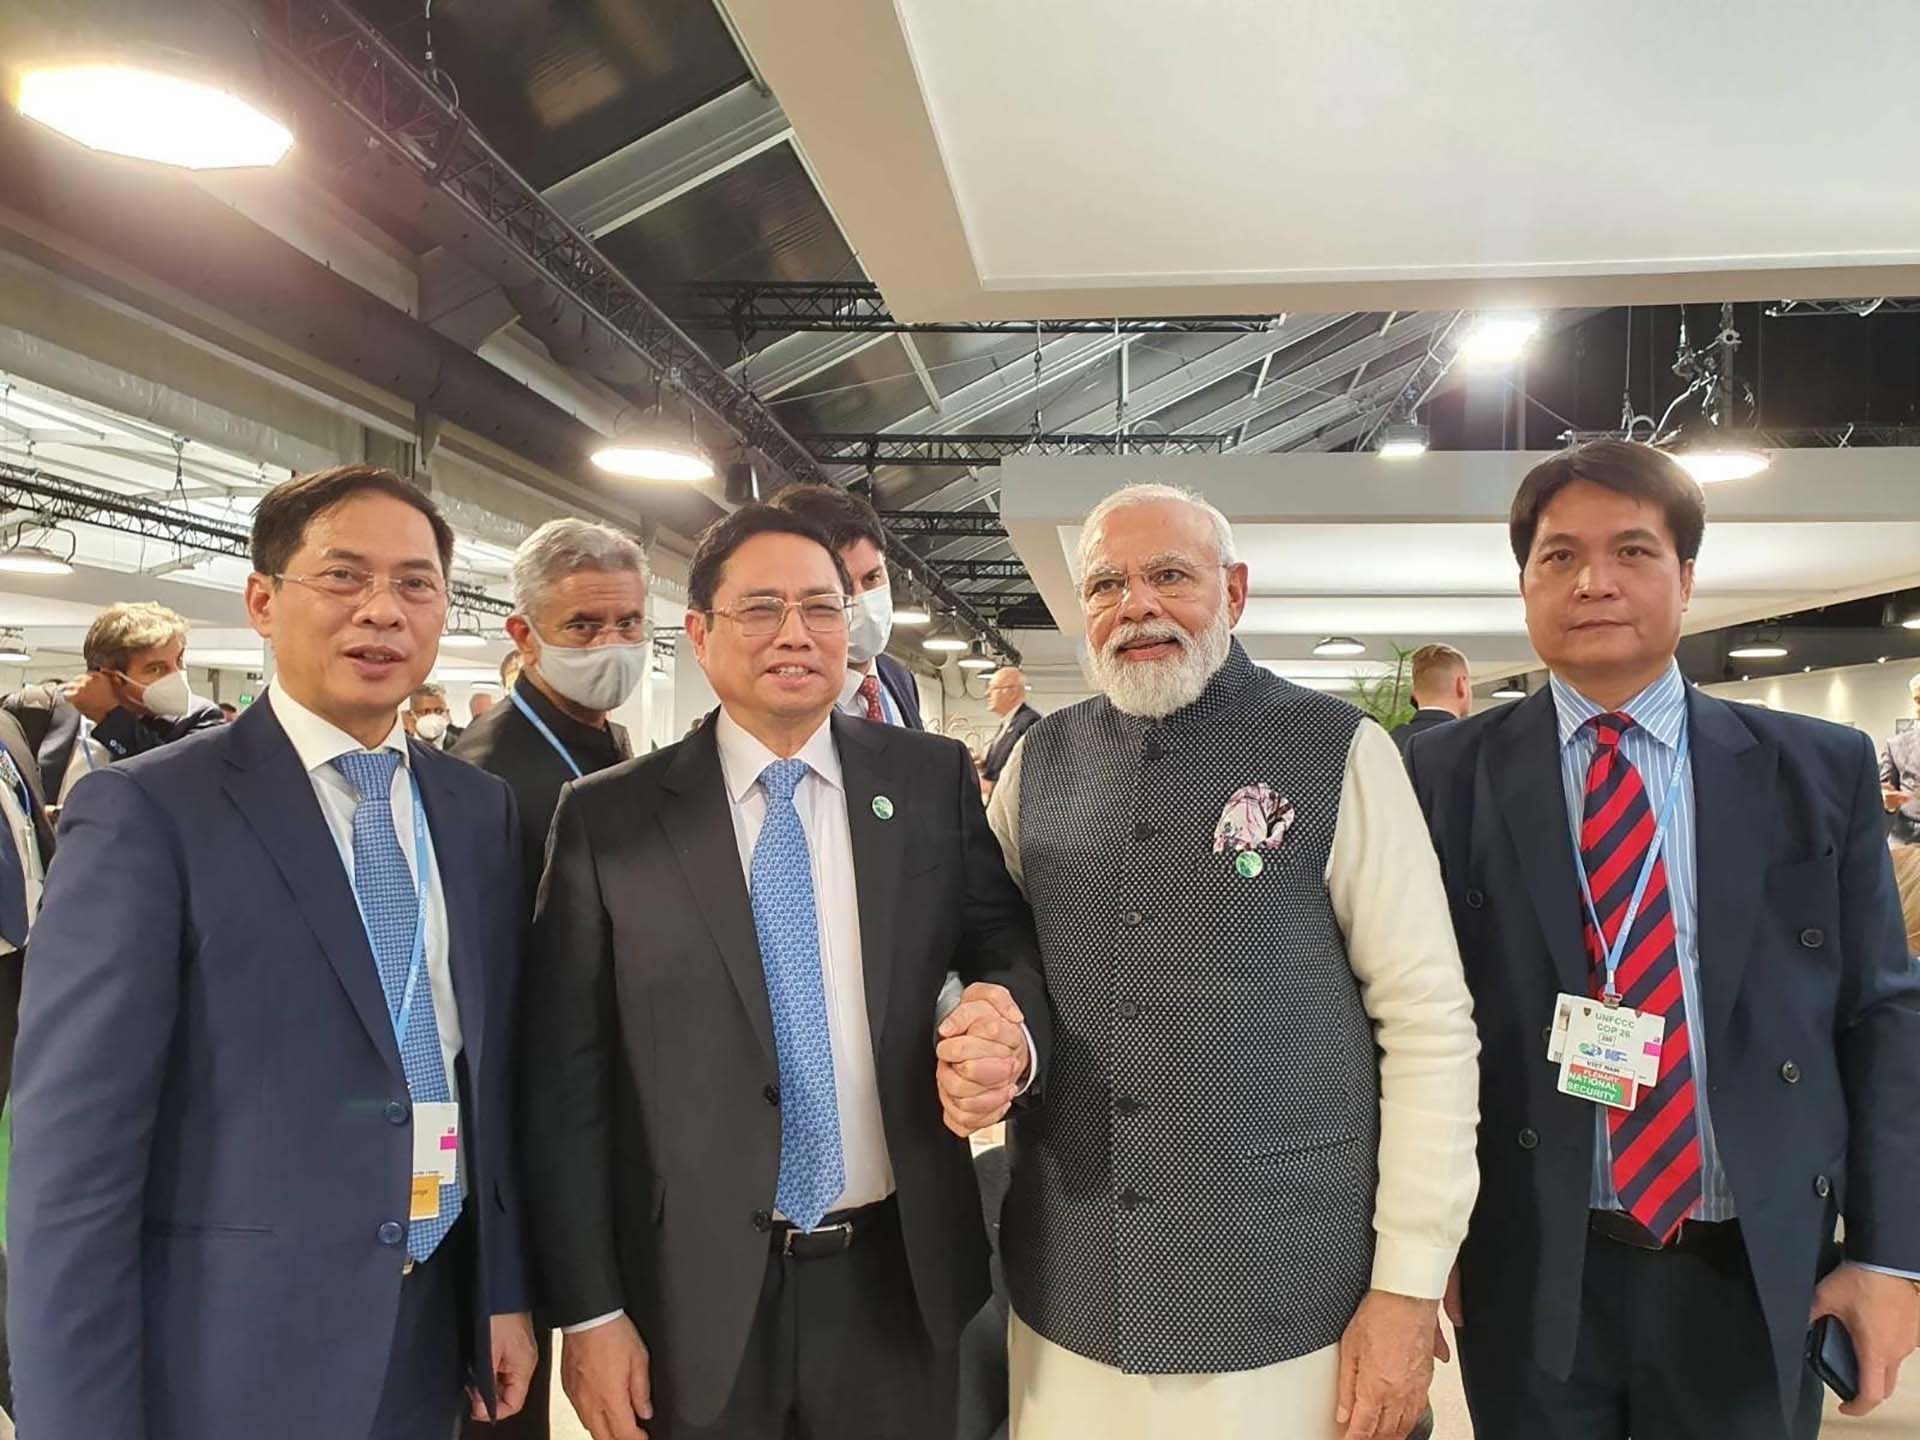 Prime Minister Pham Minh Chinh meets leaders of foreign nations, organisations on sidelines of COP26